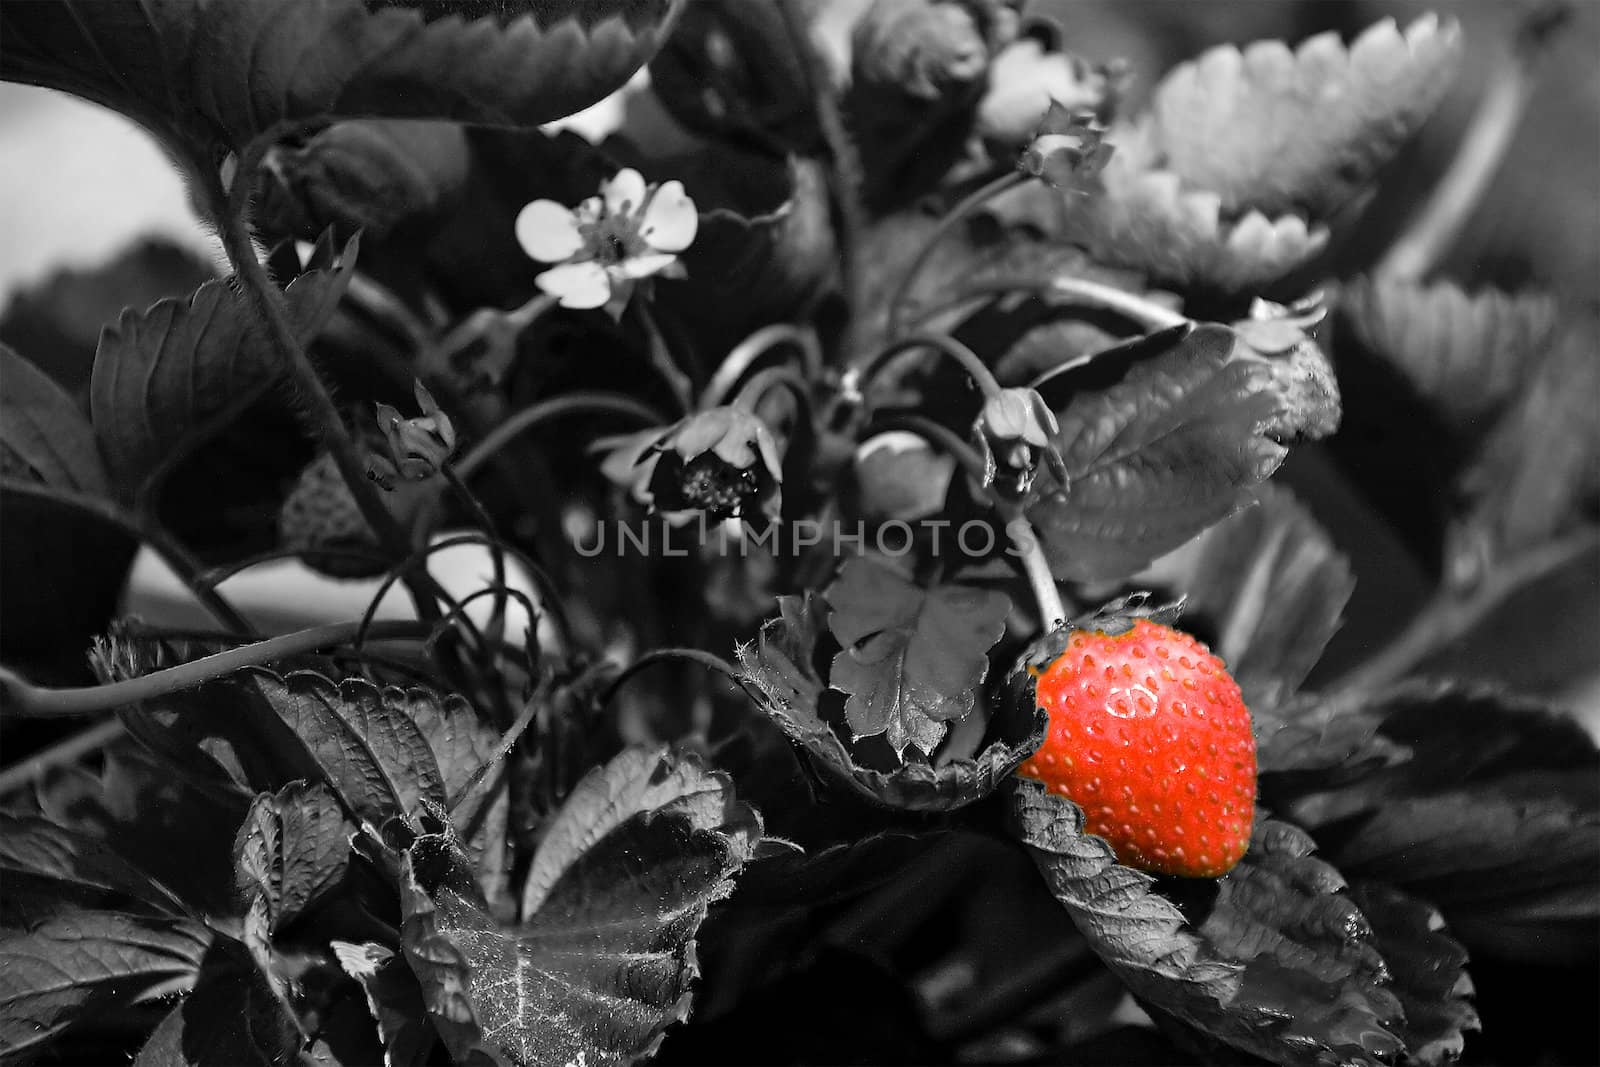 Thrickets of a strawberry. Black-and-white photo with a bright red berry